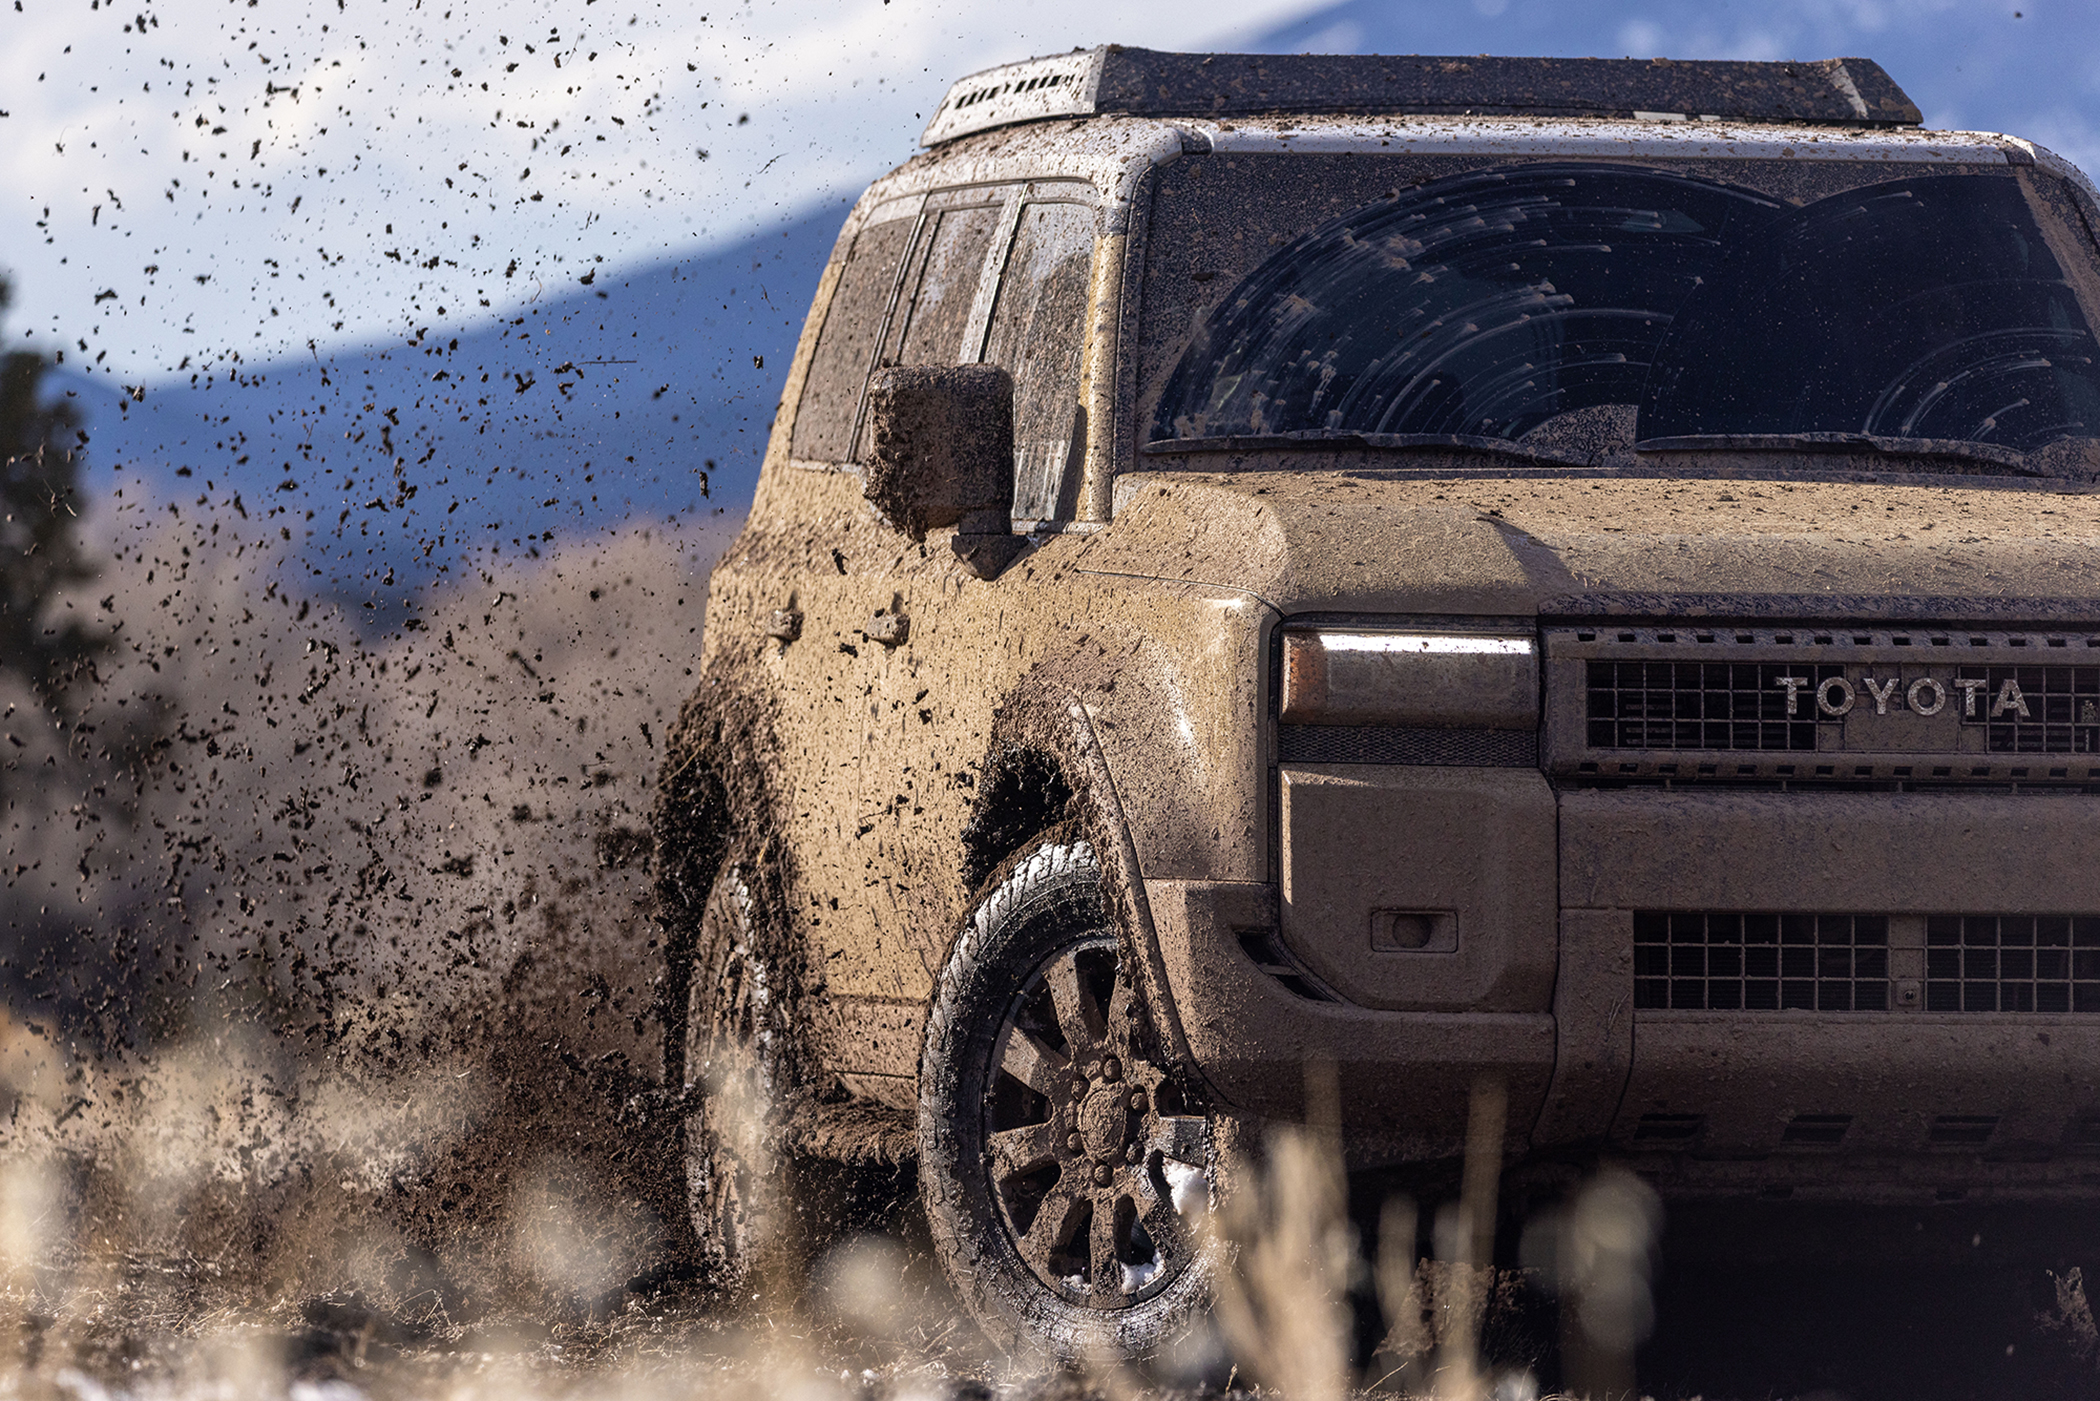 Toyota's new Land Cruiser marketing campaign features Hilary Swank and Jimmy O. Yang in a thrilling adventure. Watch them tackle rugged terrains and test the SUV's capabilities.